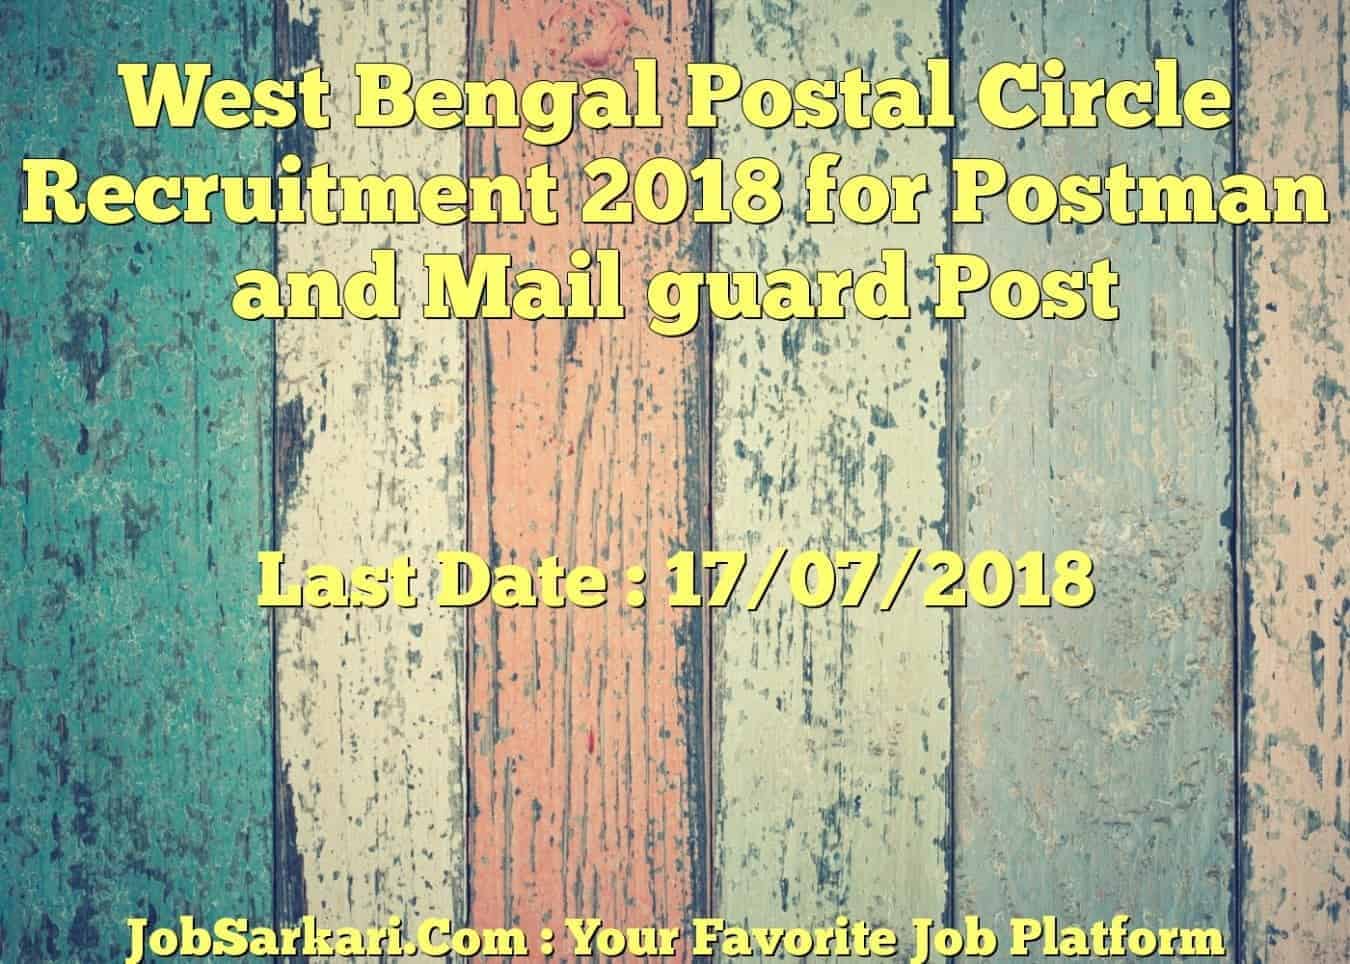 West Bengal Postal Circle Recruitment 2018 for Postman and Mail guard Post